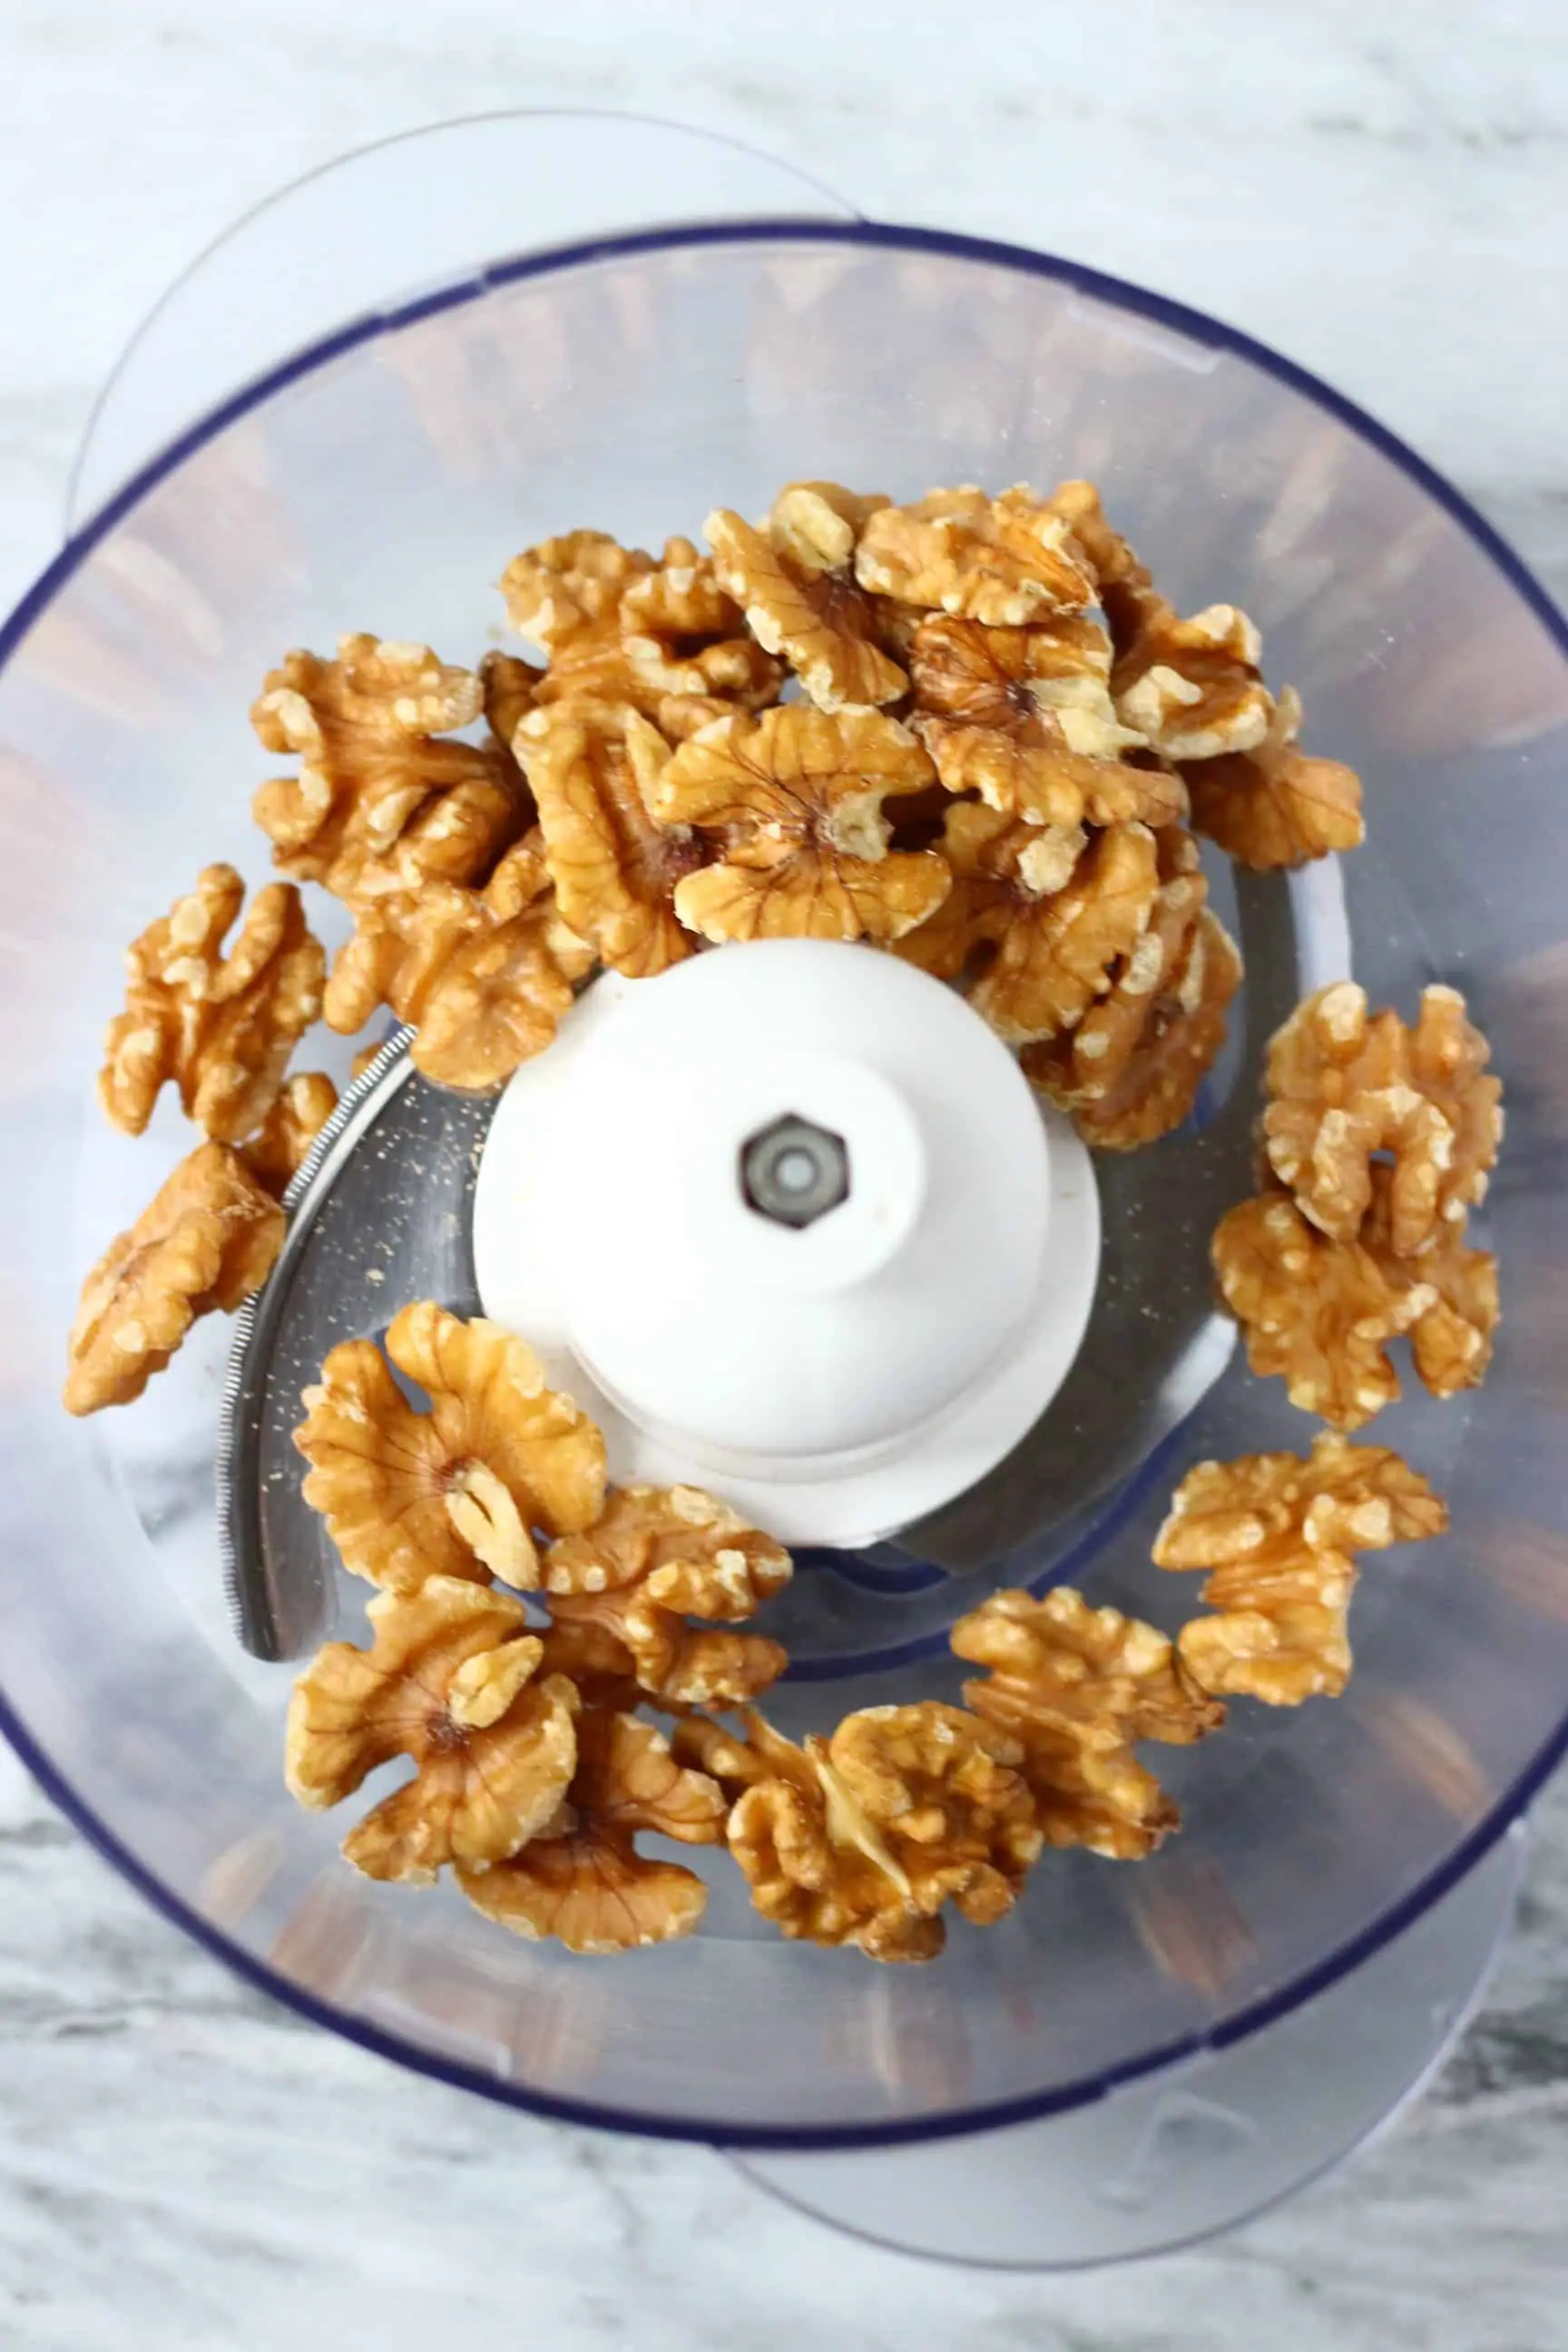 Walnuts in a food processor against a marble background